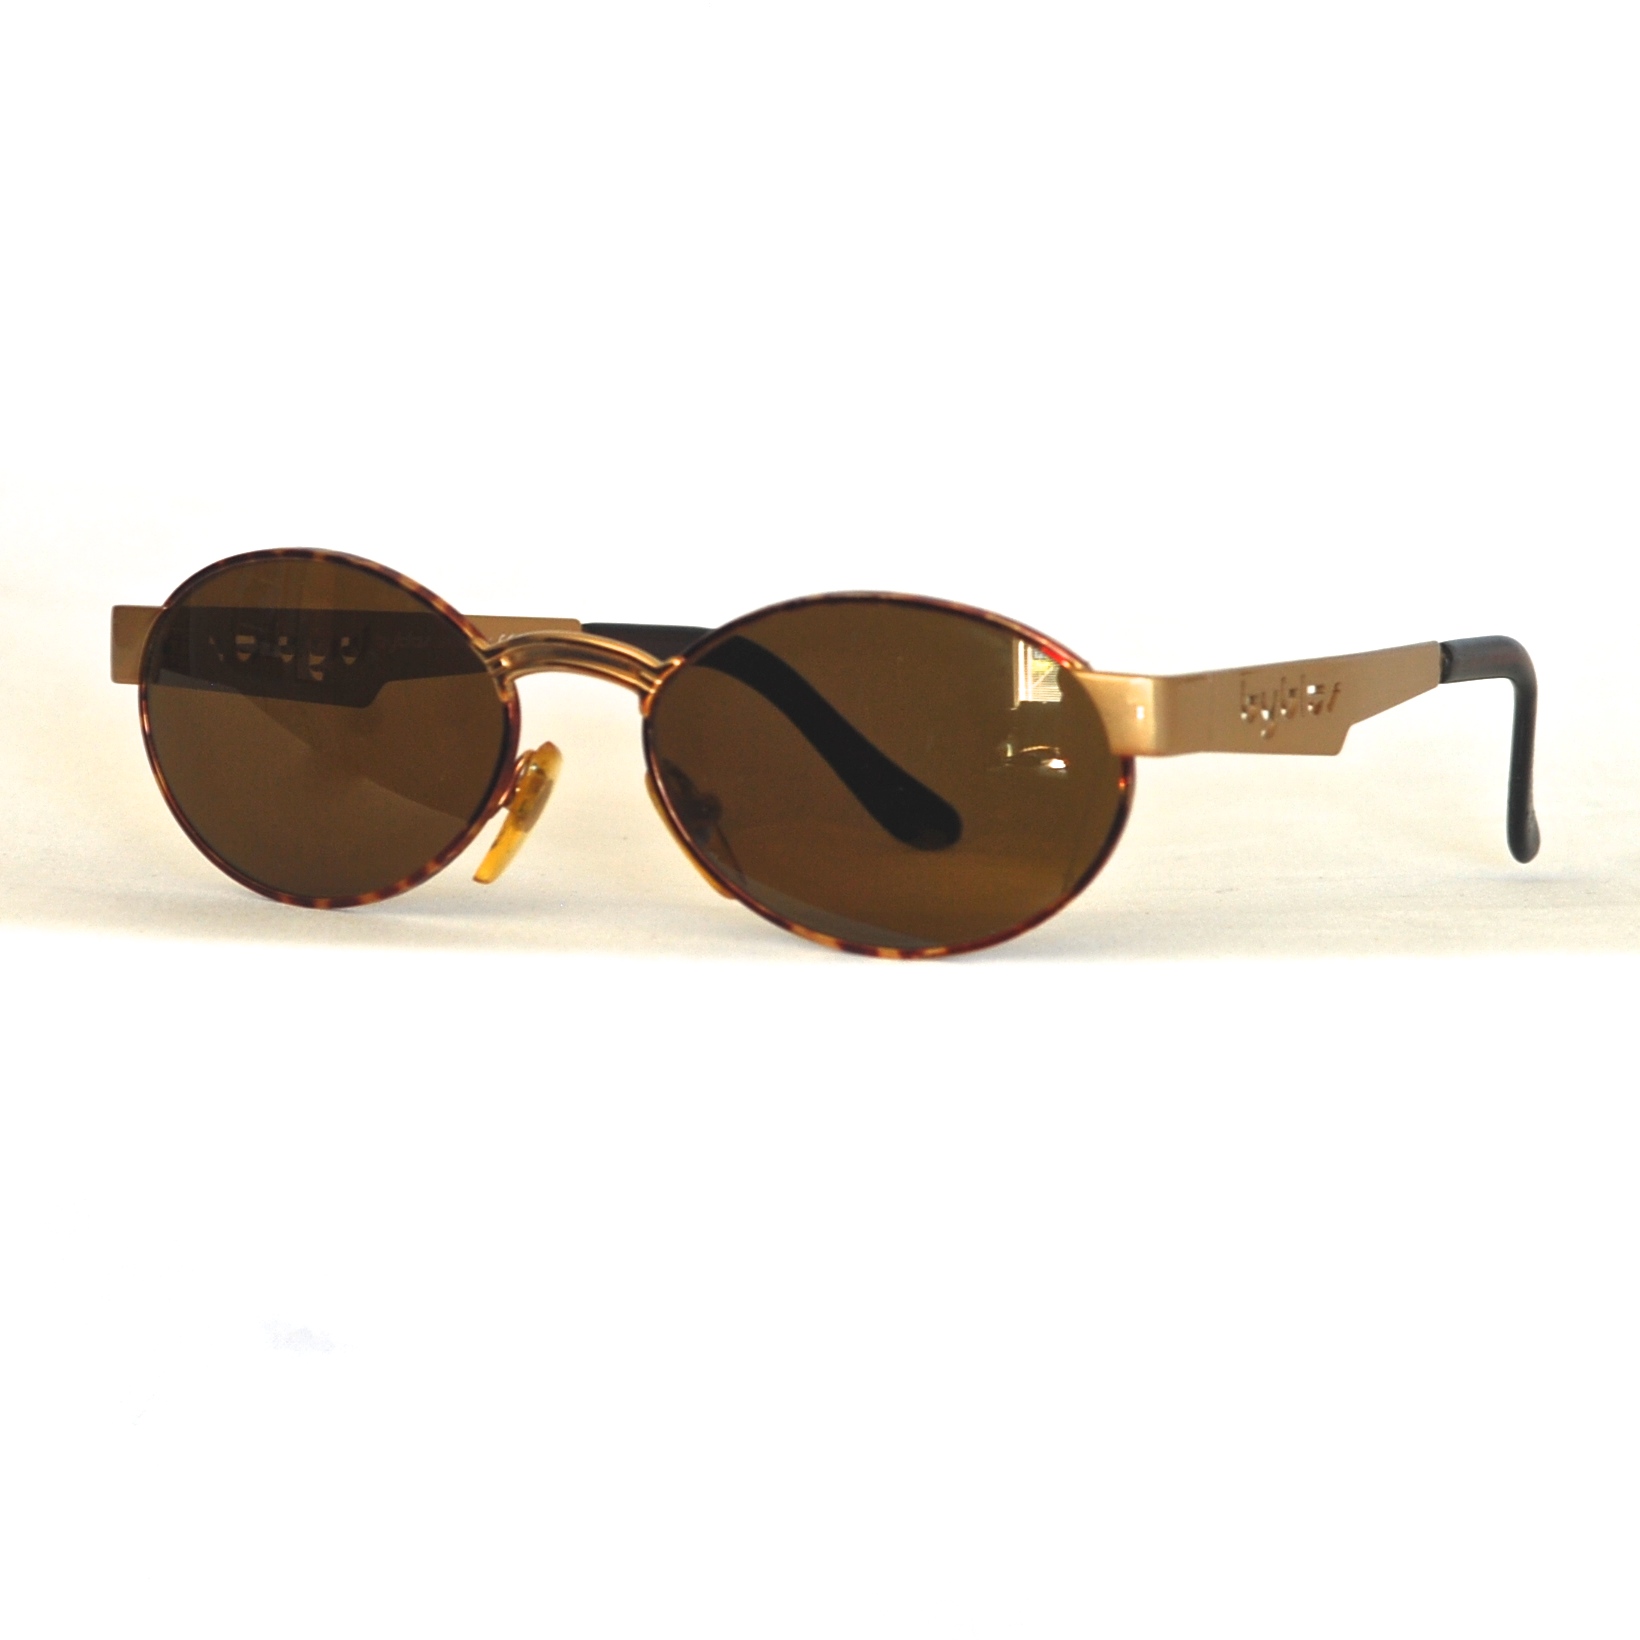 Byblos 1990’s Sunglasses With Open Byblos Lettering On Arms – Italy ...